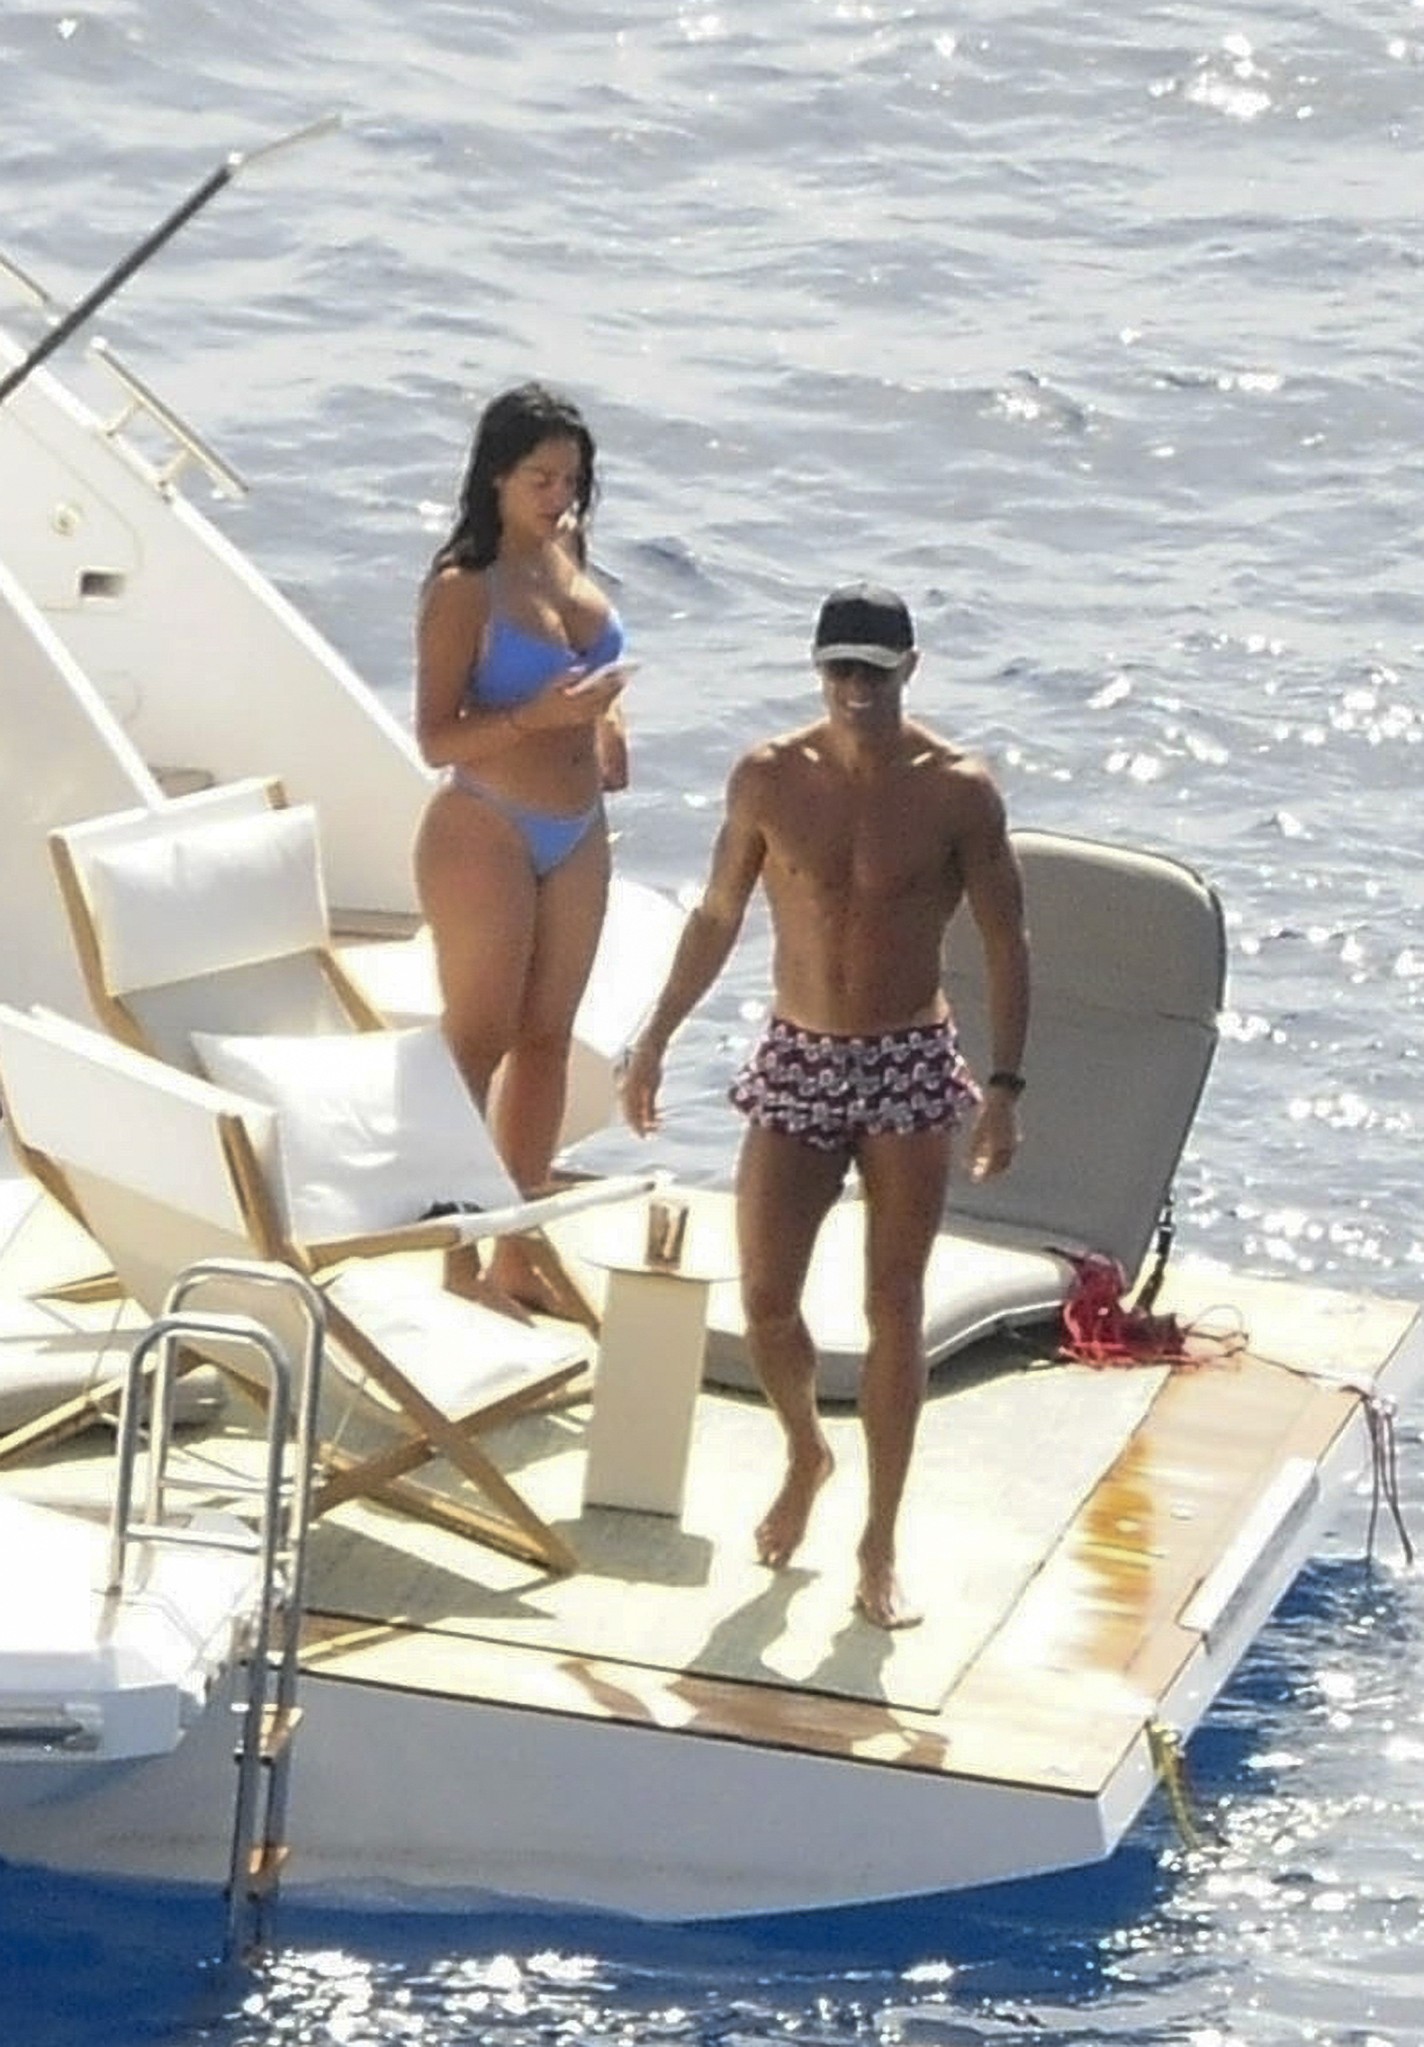 p.Currently, C.Ronaldo is enjoying a fun moment by the pool with his girlfriend Georgina Rodriguez and children after a successful season that makes fans excited.p - LifeAnimal